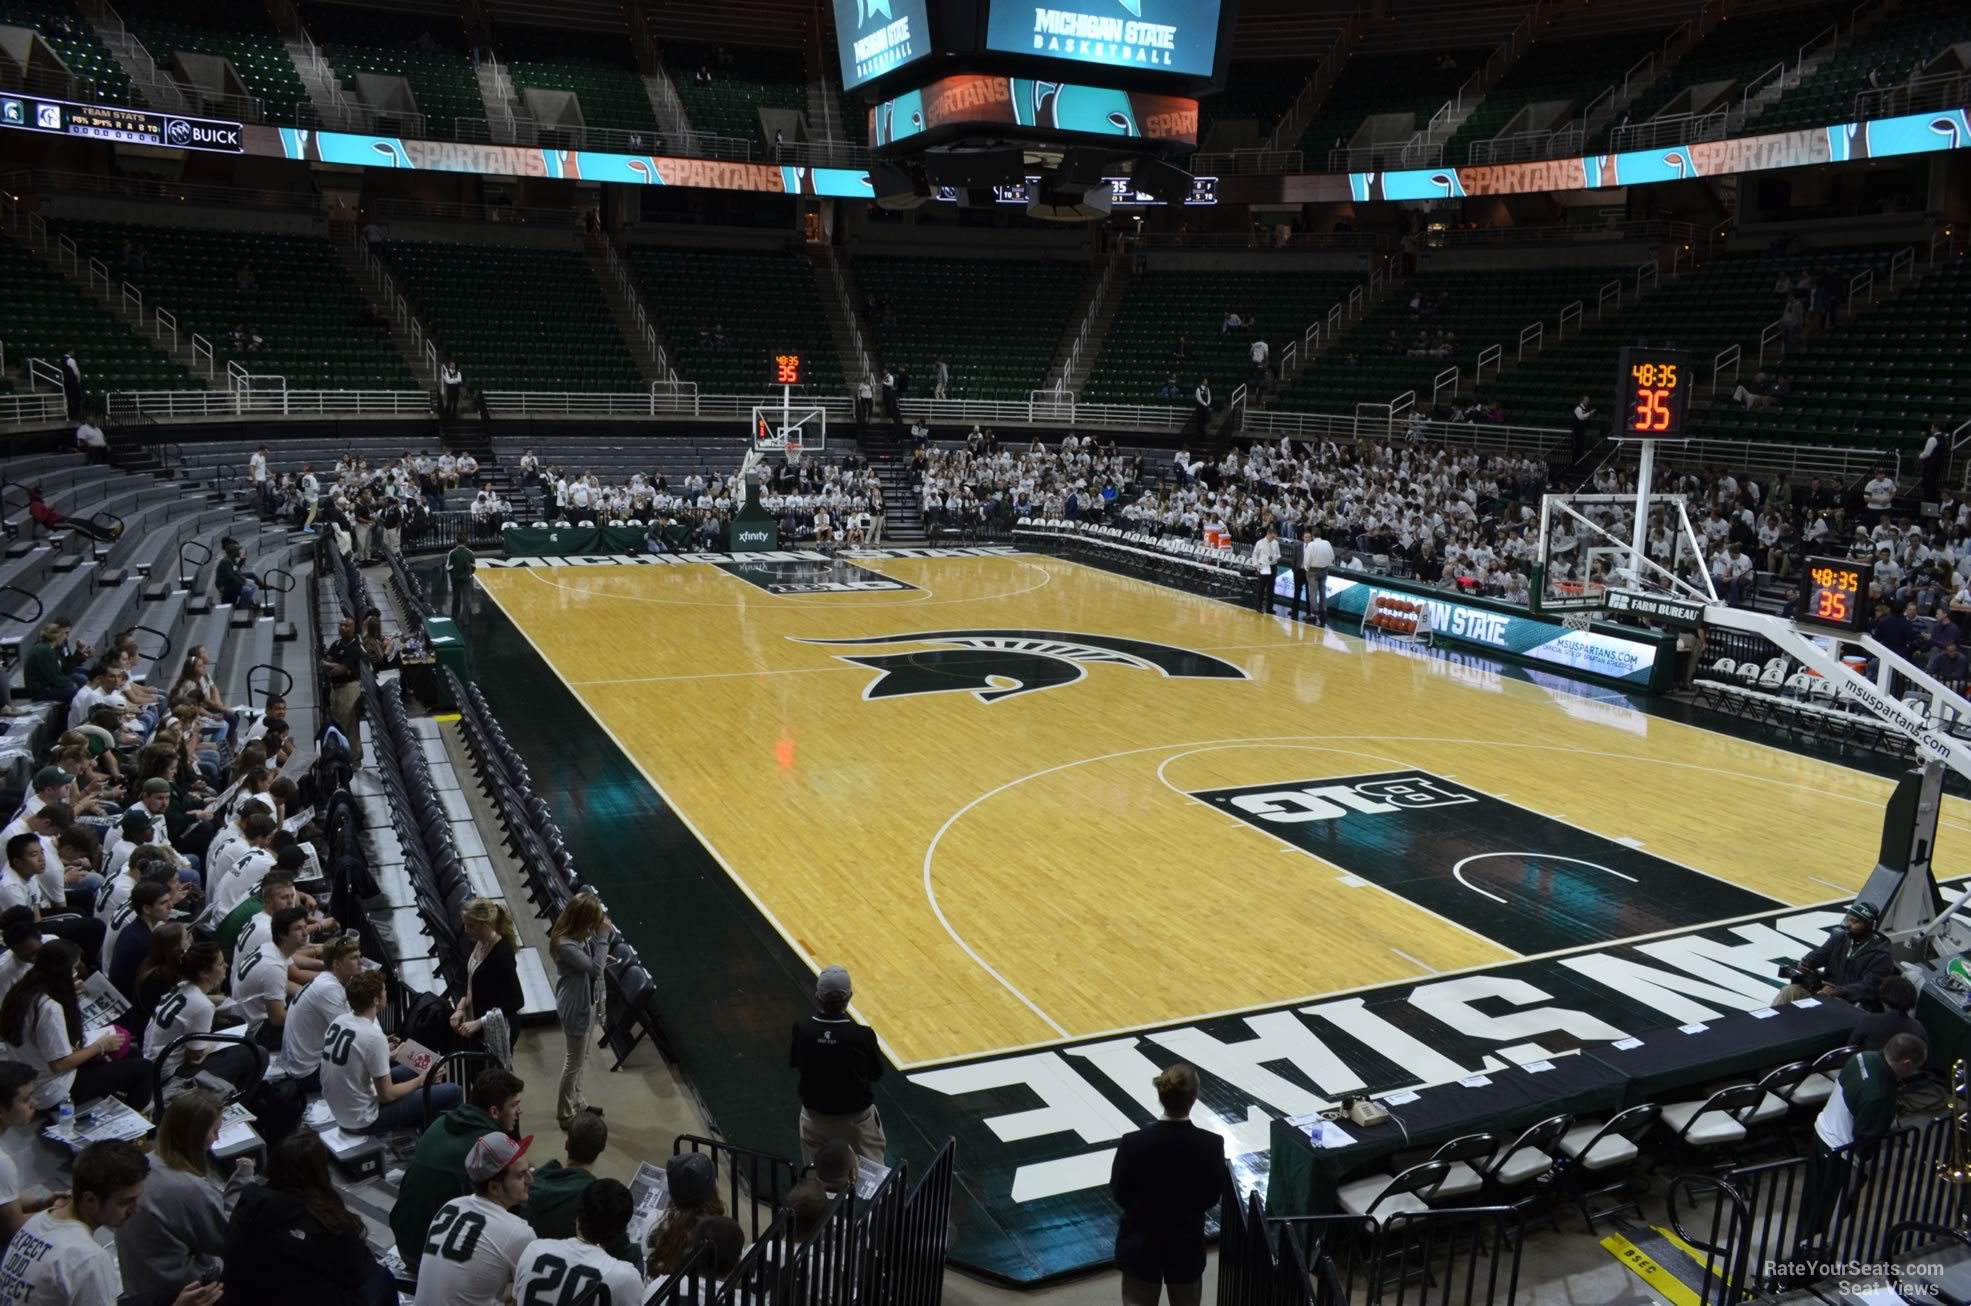 section 122, row 13 seat view  - breslin center